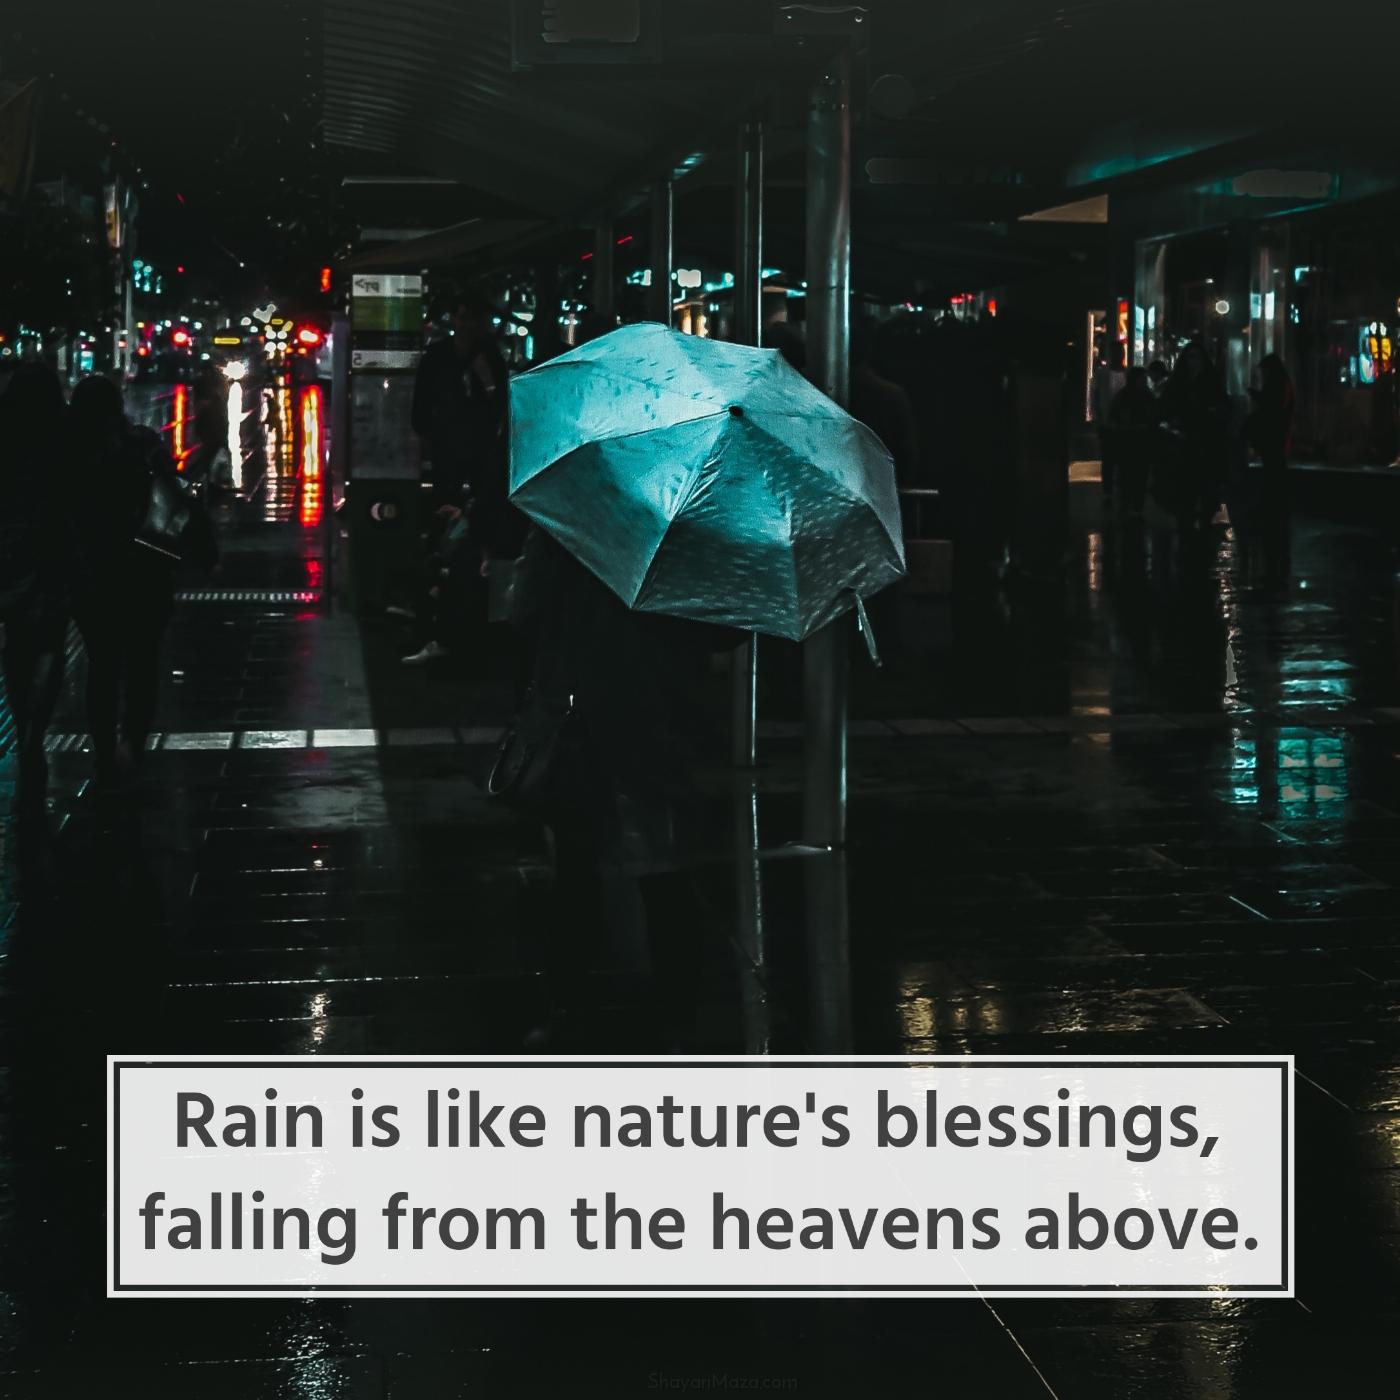 Rain is like nature's blessings falling from the heavens above